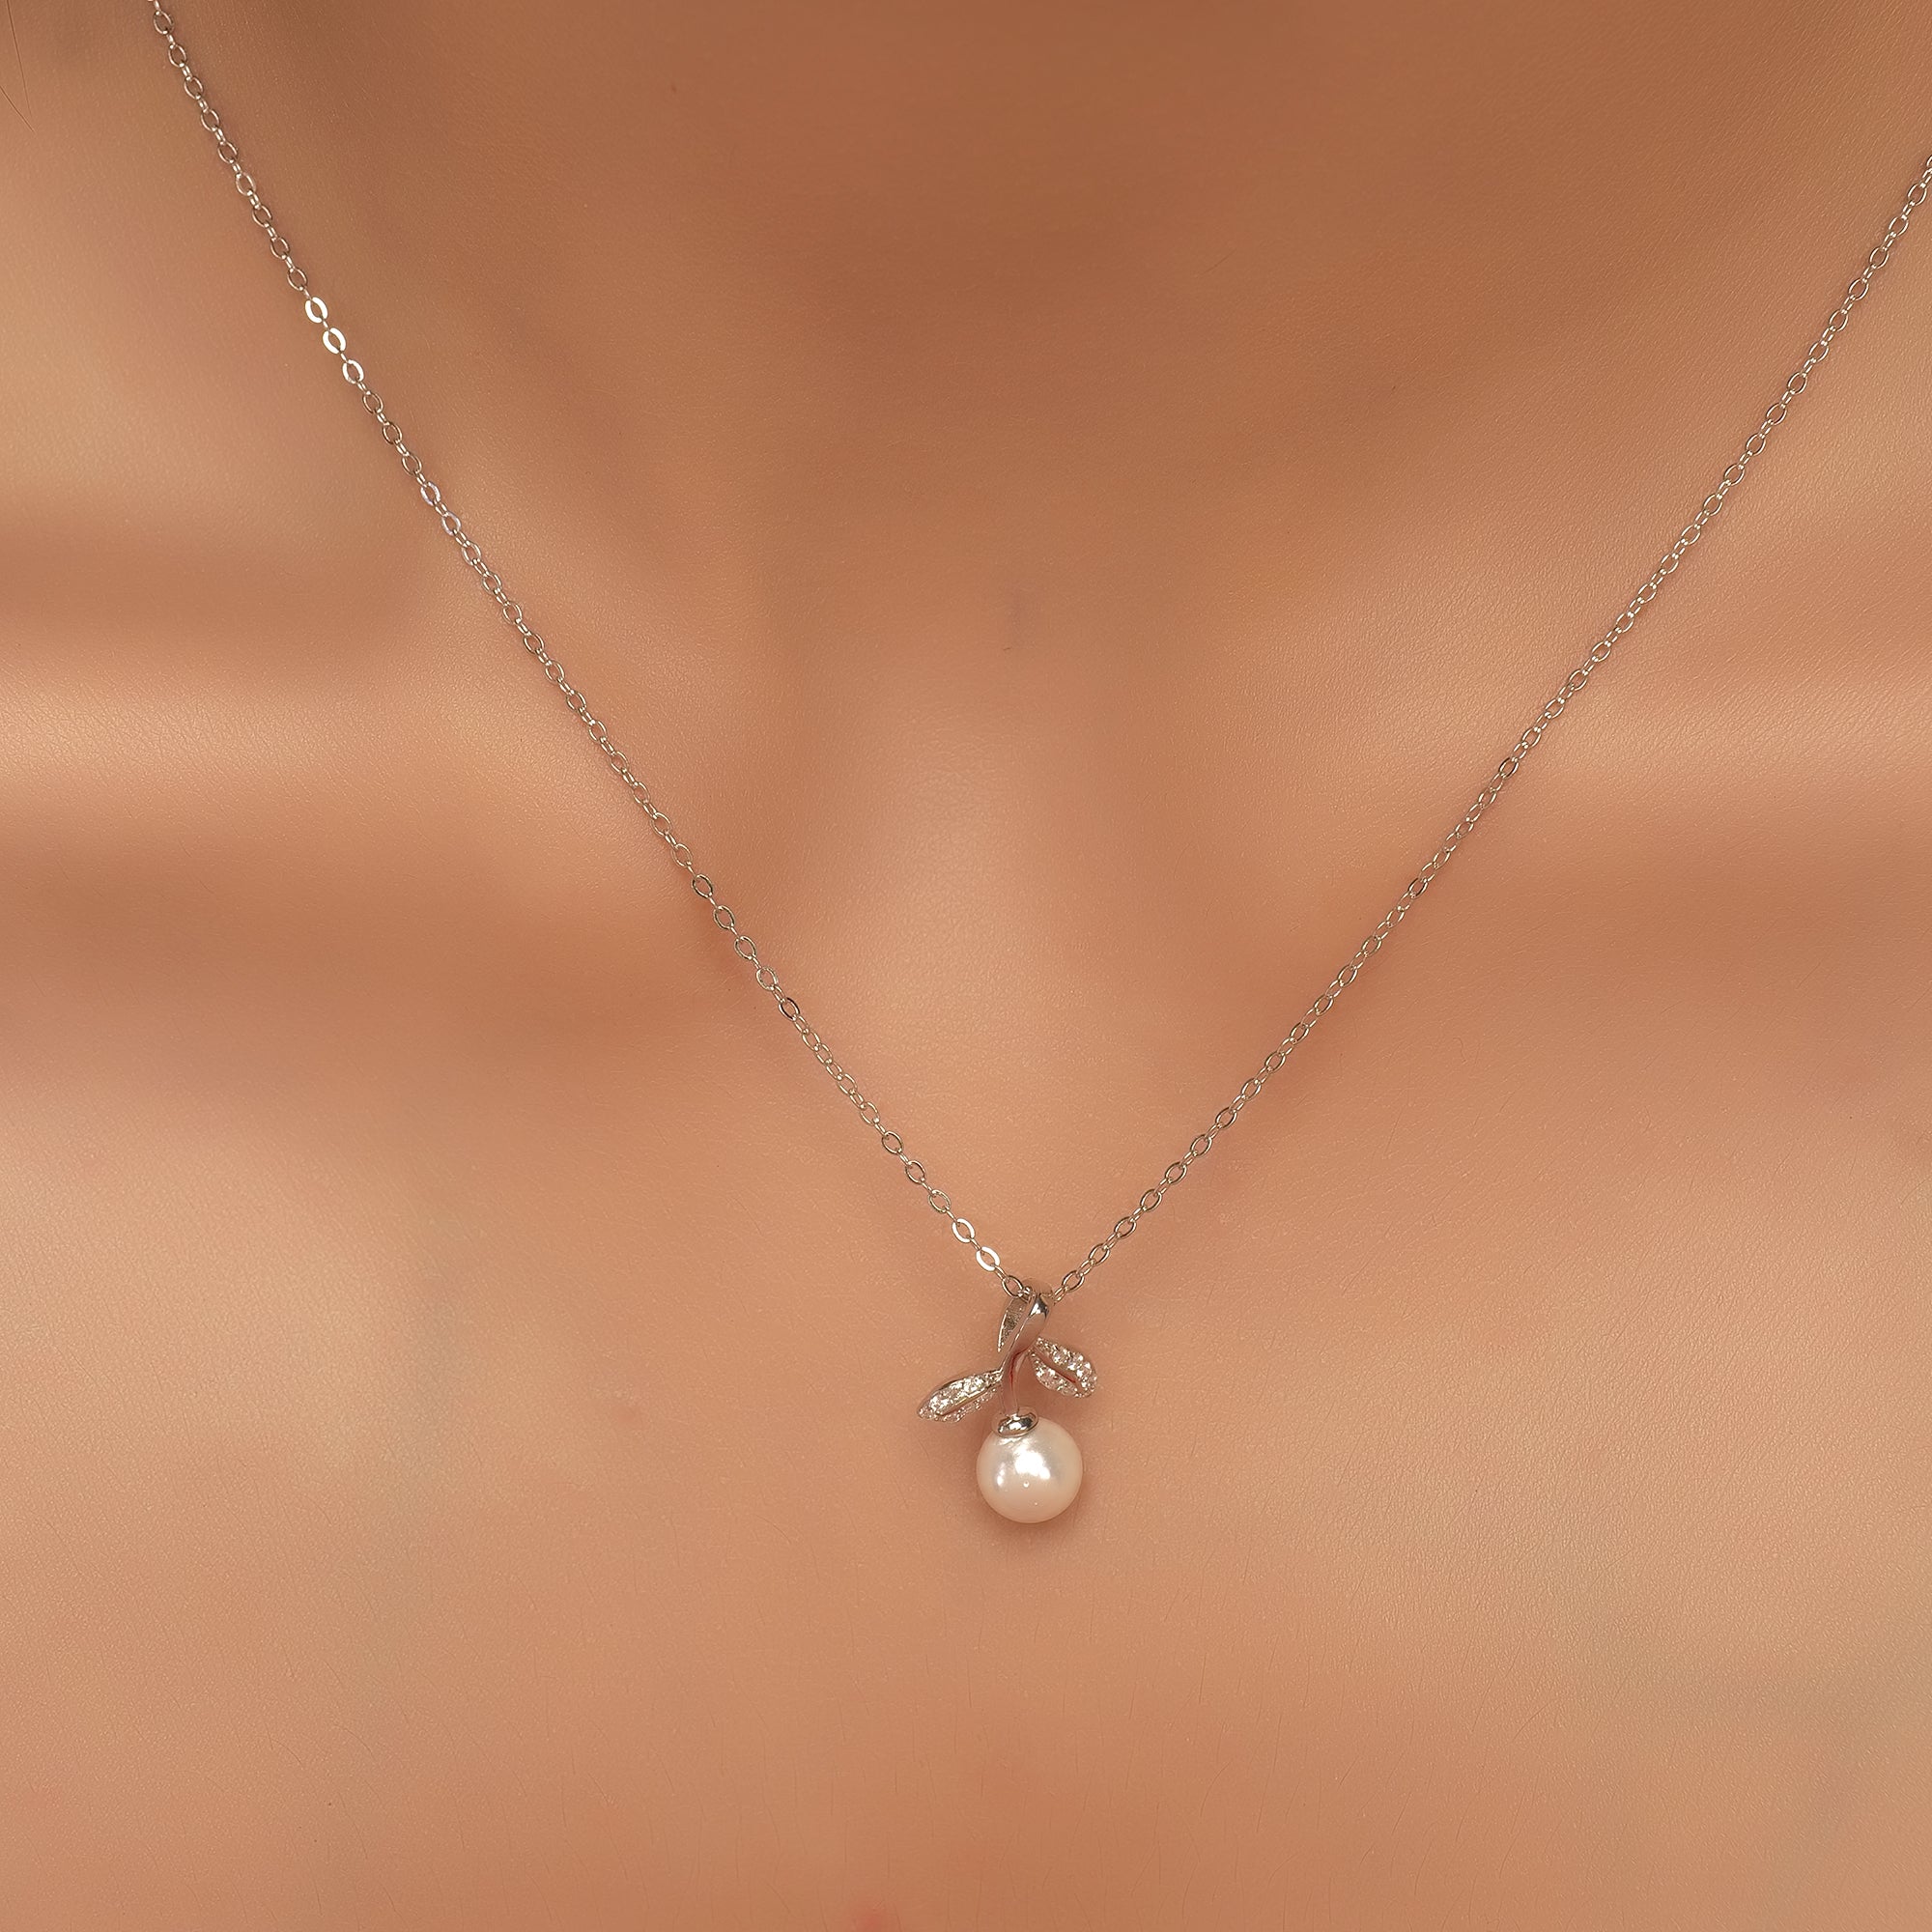 Diamond leaf with Pearl Pendant necklace